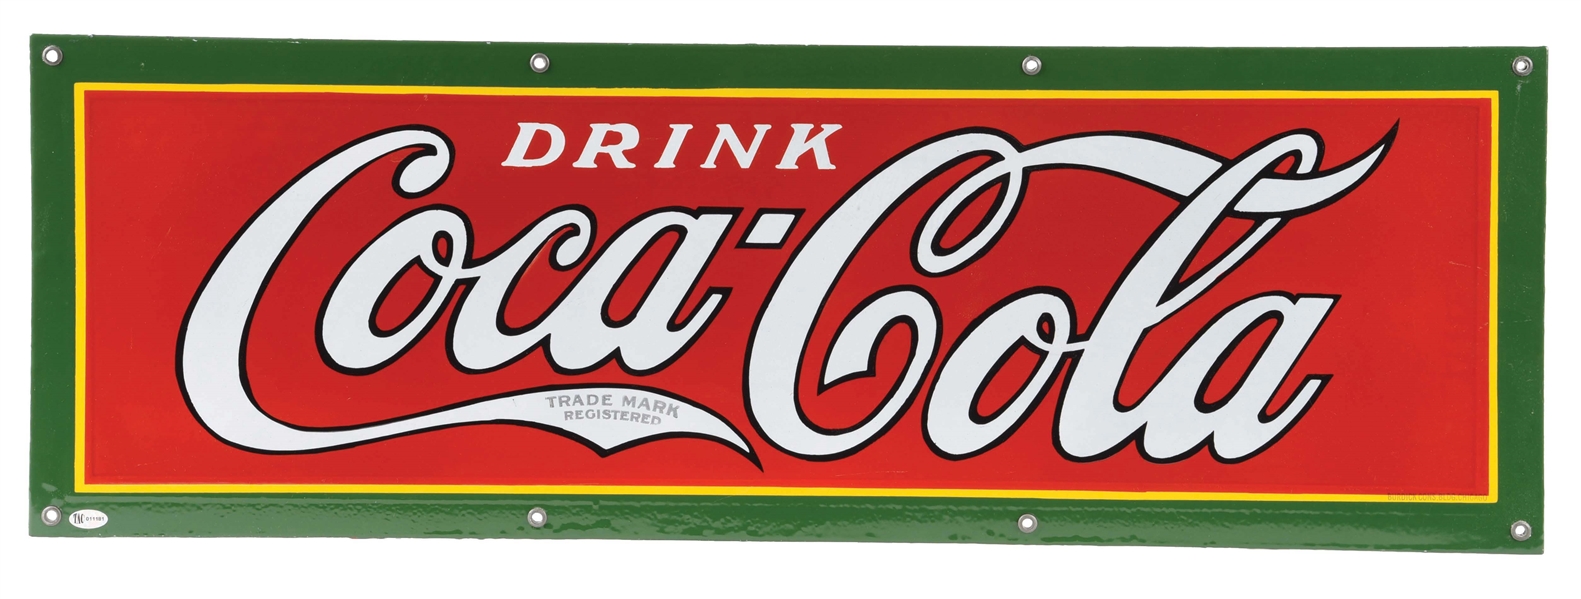 ICONIC & OUTSTANDING DRINK COCA COLA PORCELAIN STRIP SIGN.